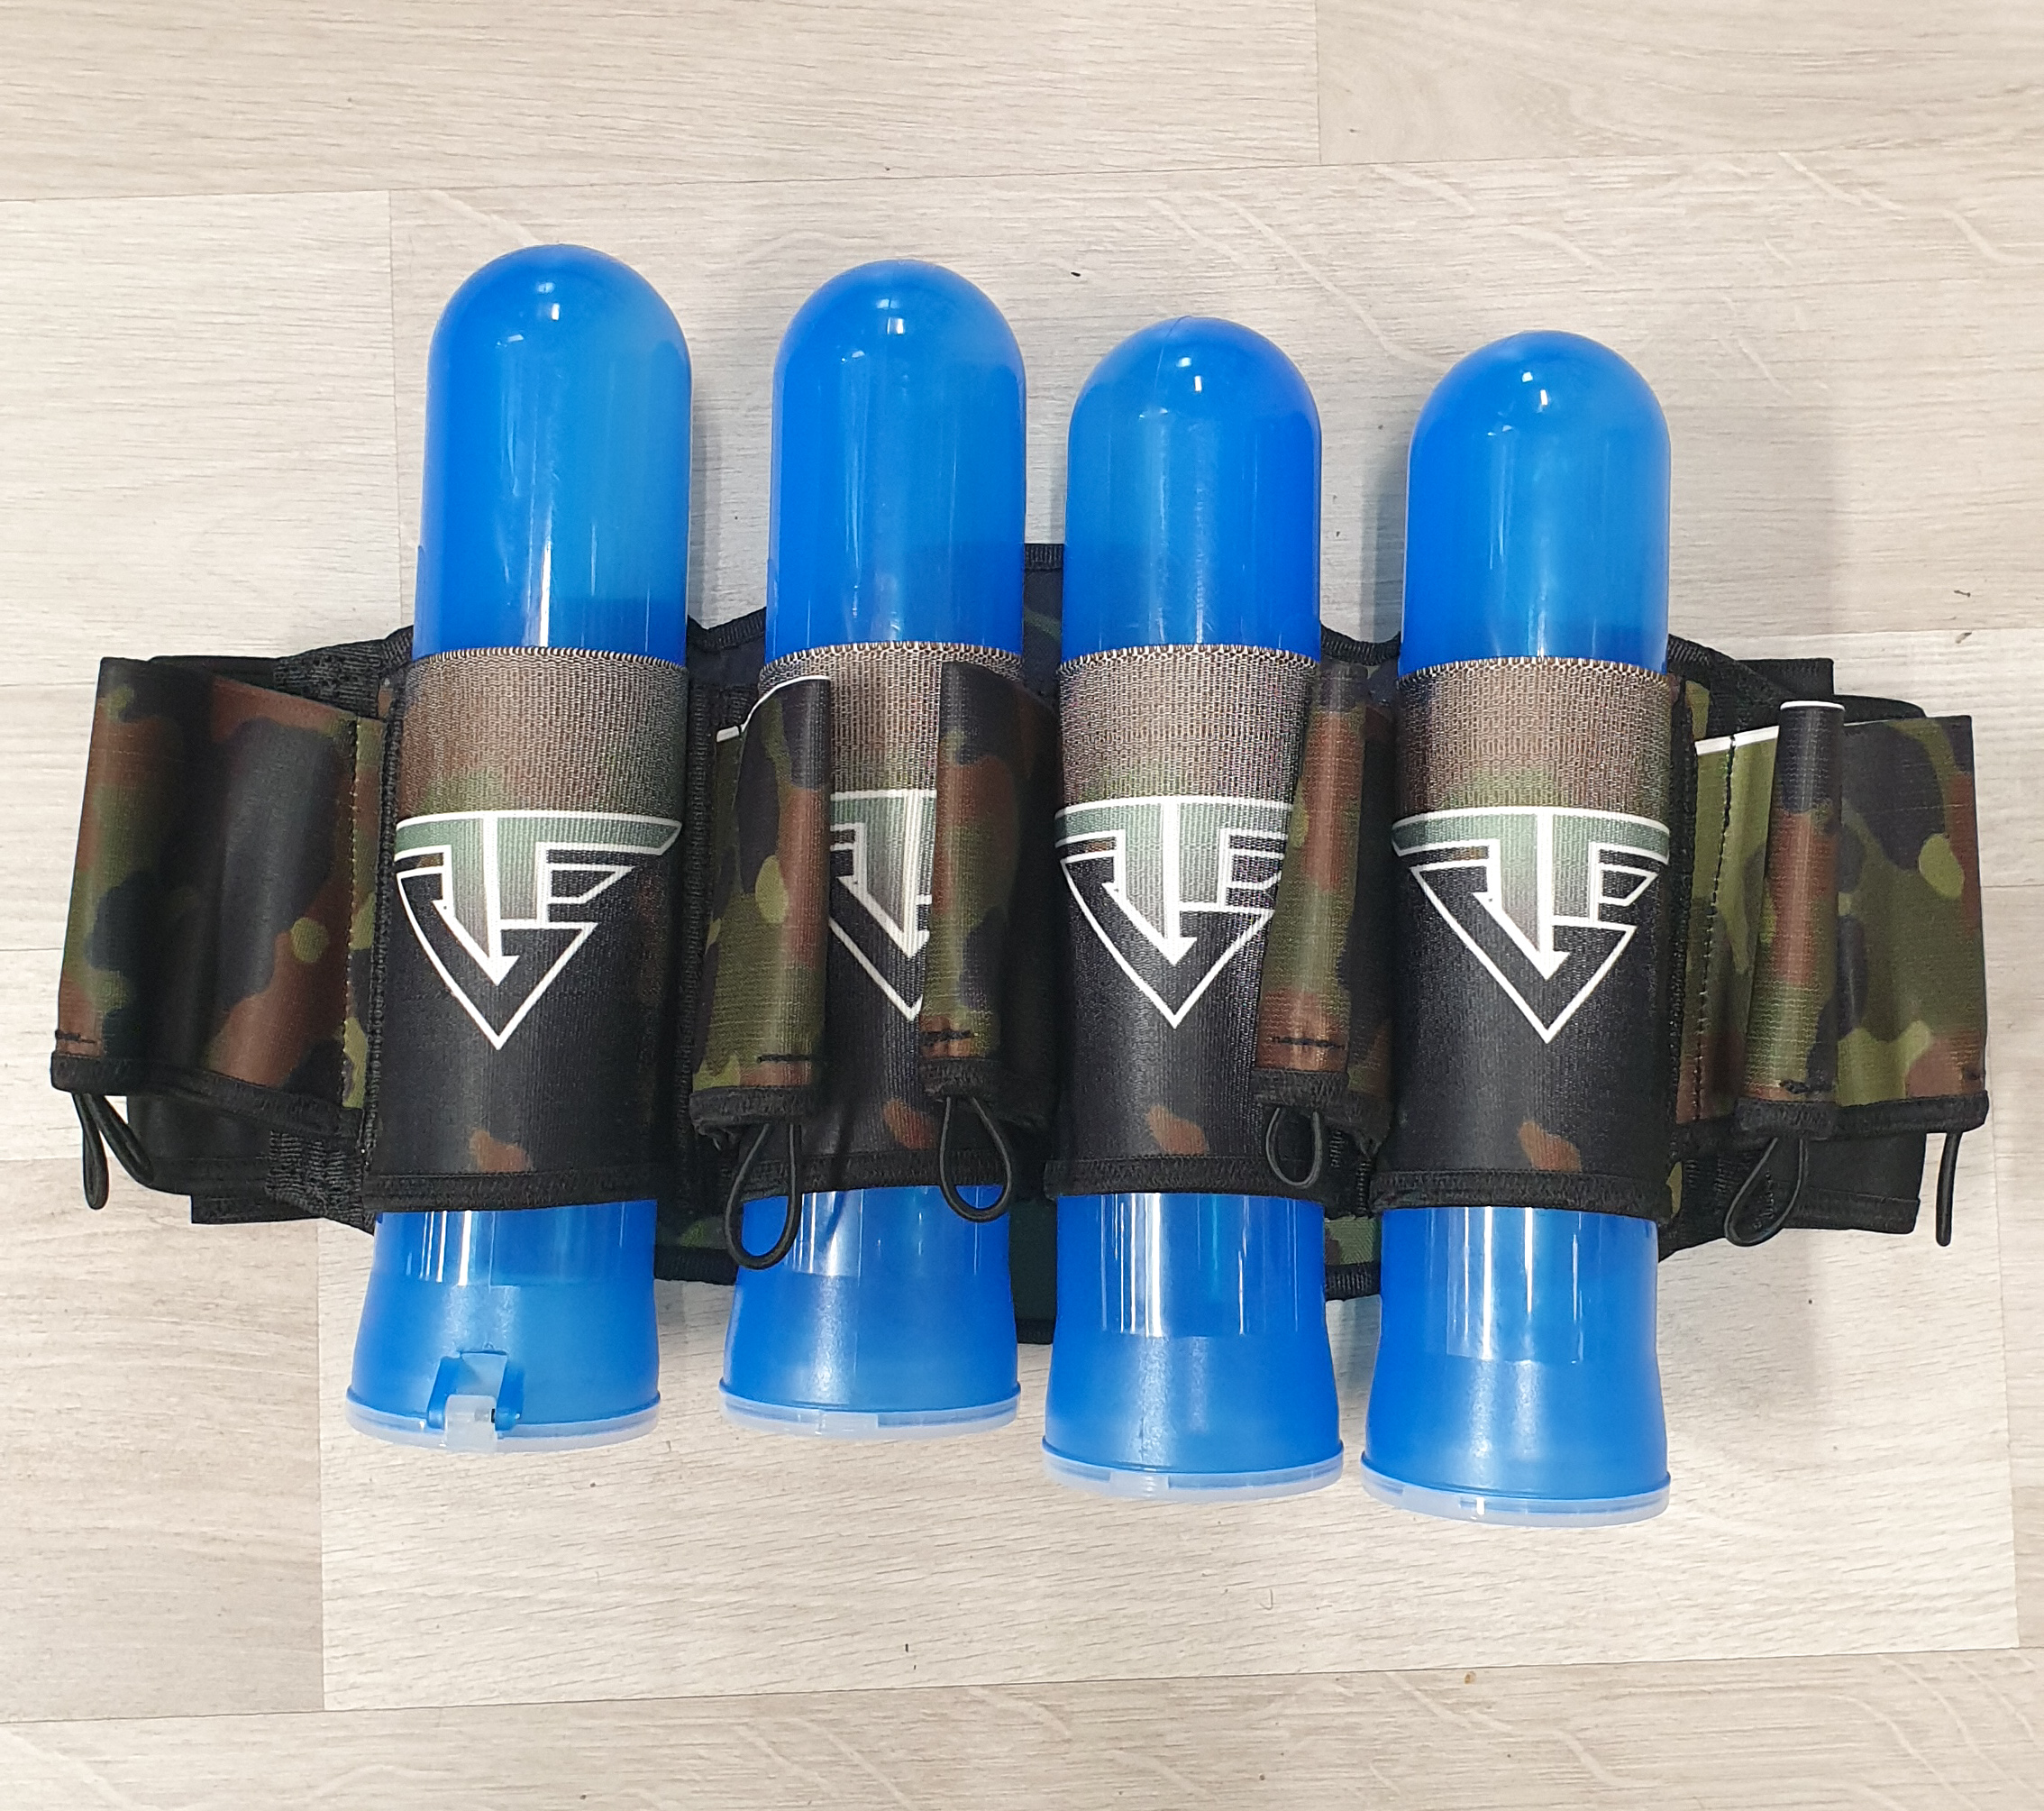 Pod pack for 4+7 pods - USED